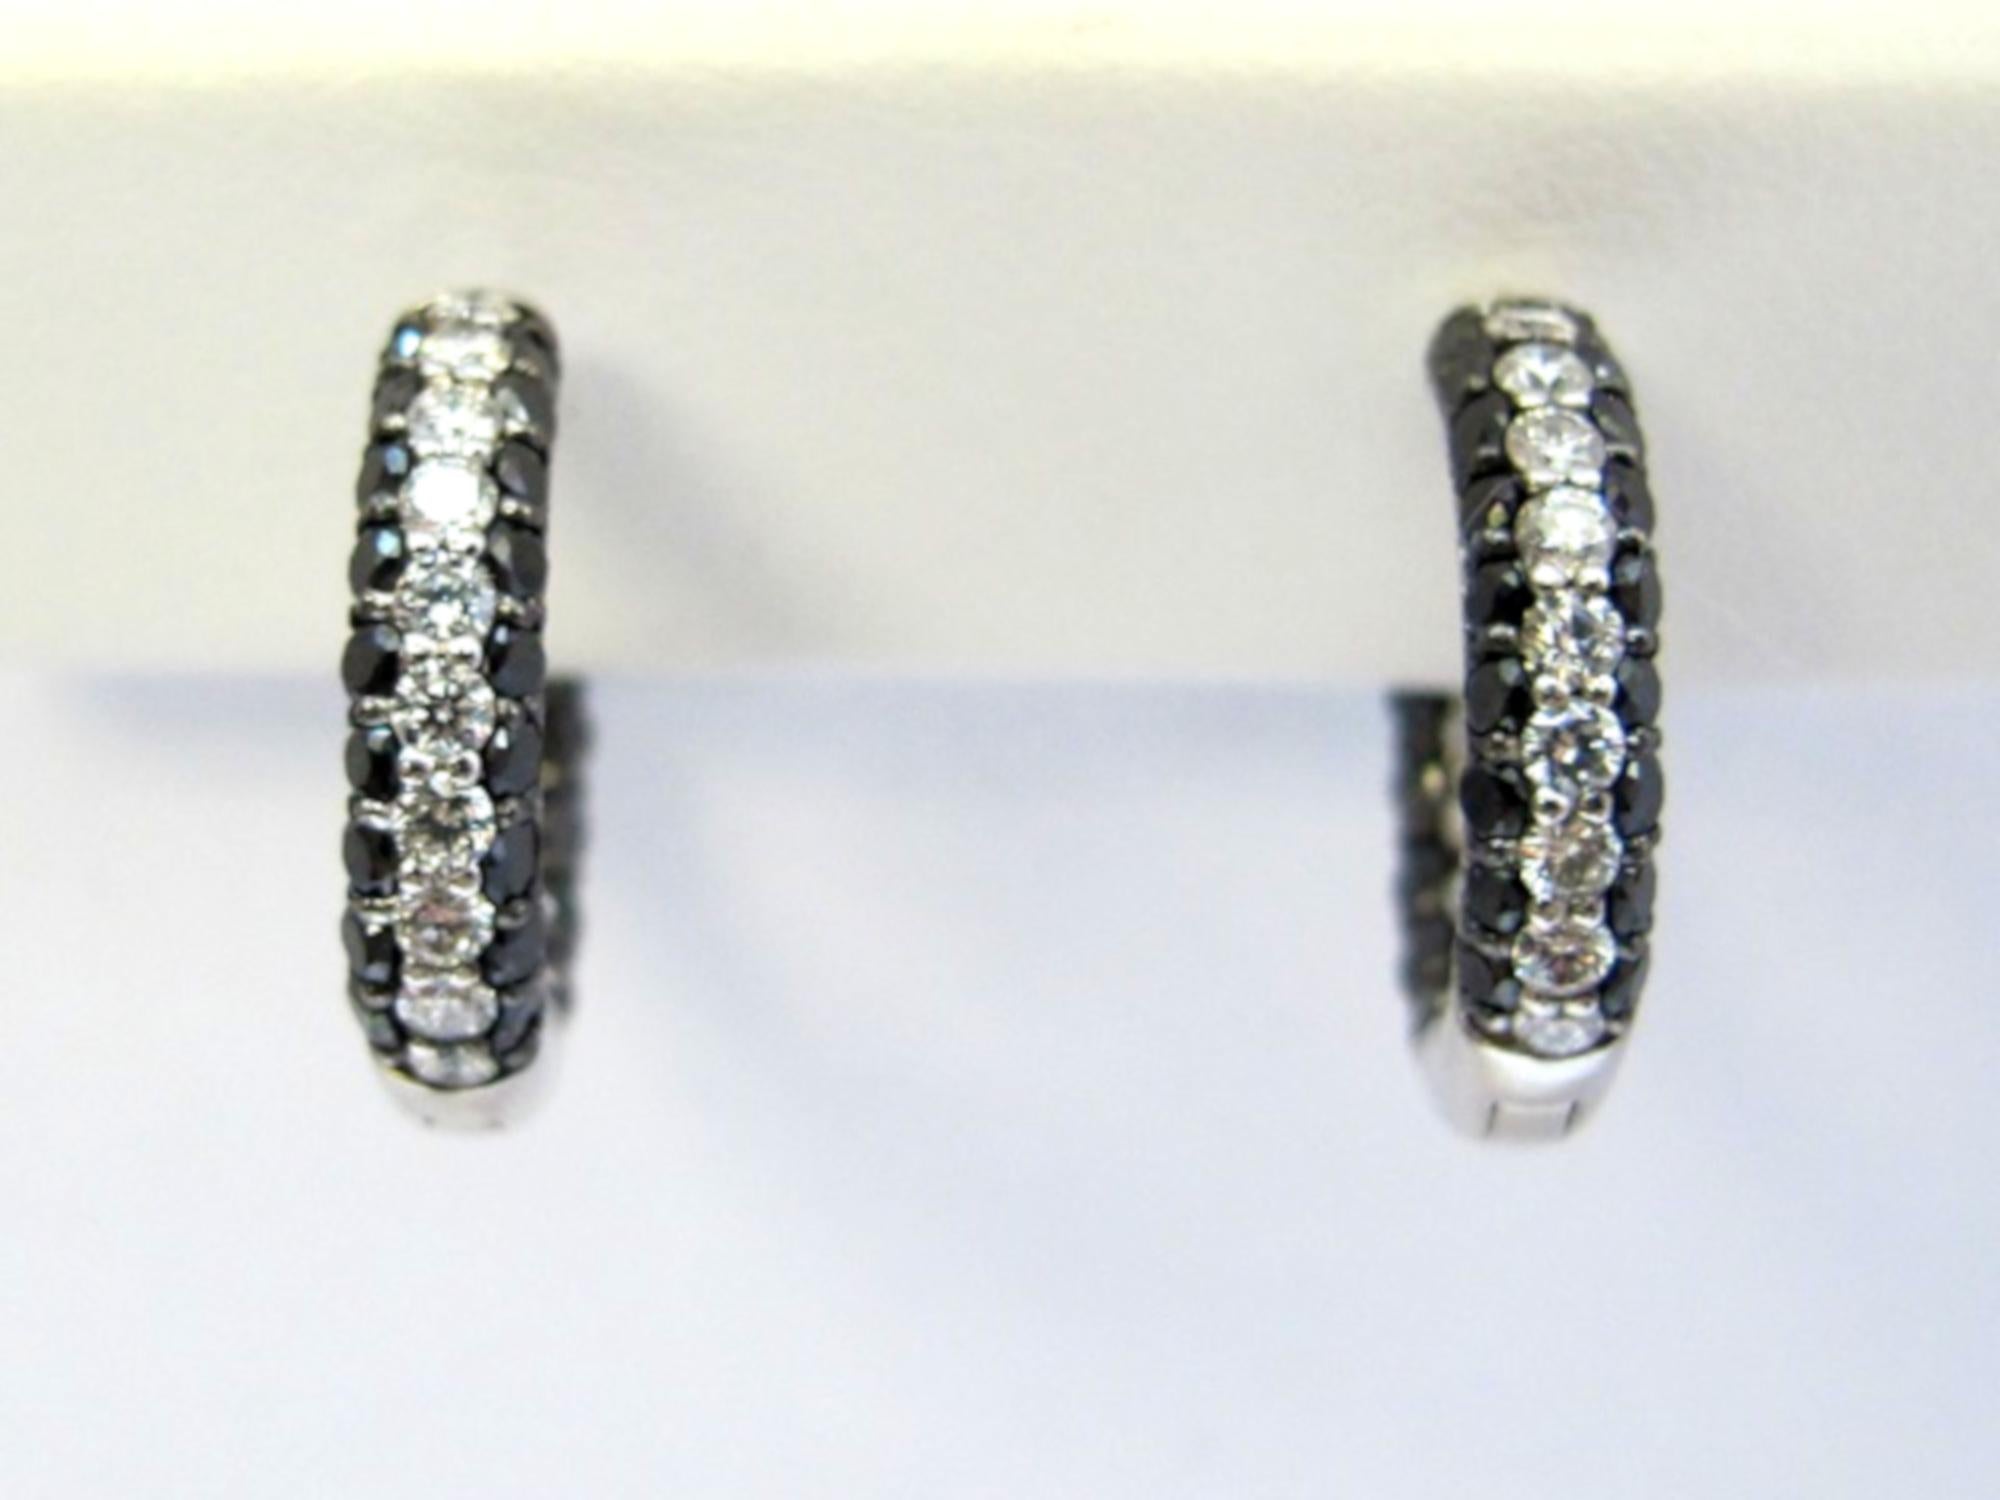 Paint the town black and white in these hoop earrings of contrasting black diamonds (1.33 carats total weight) and white diamonds (.63 carats total weight).  They are so pretty and unusual, with the diamonds being set both on the inside and outside